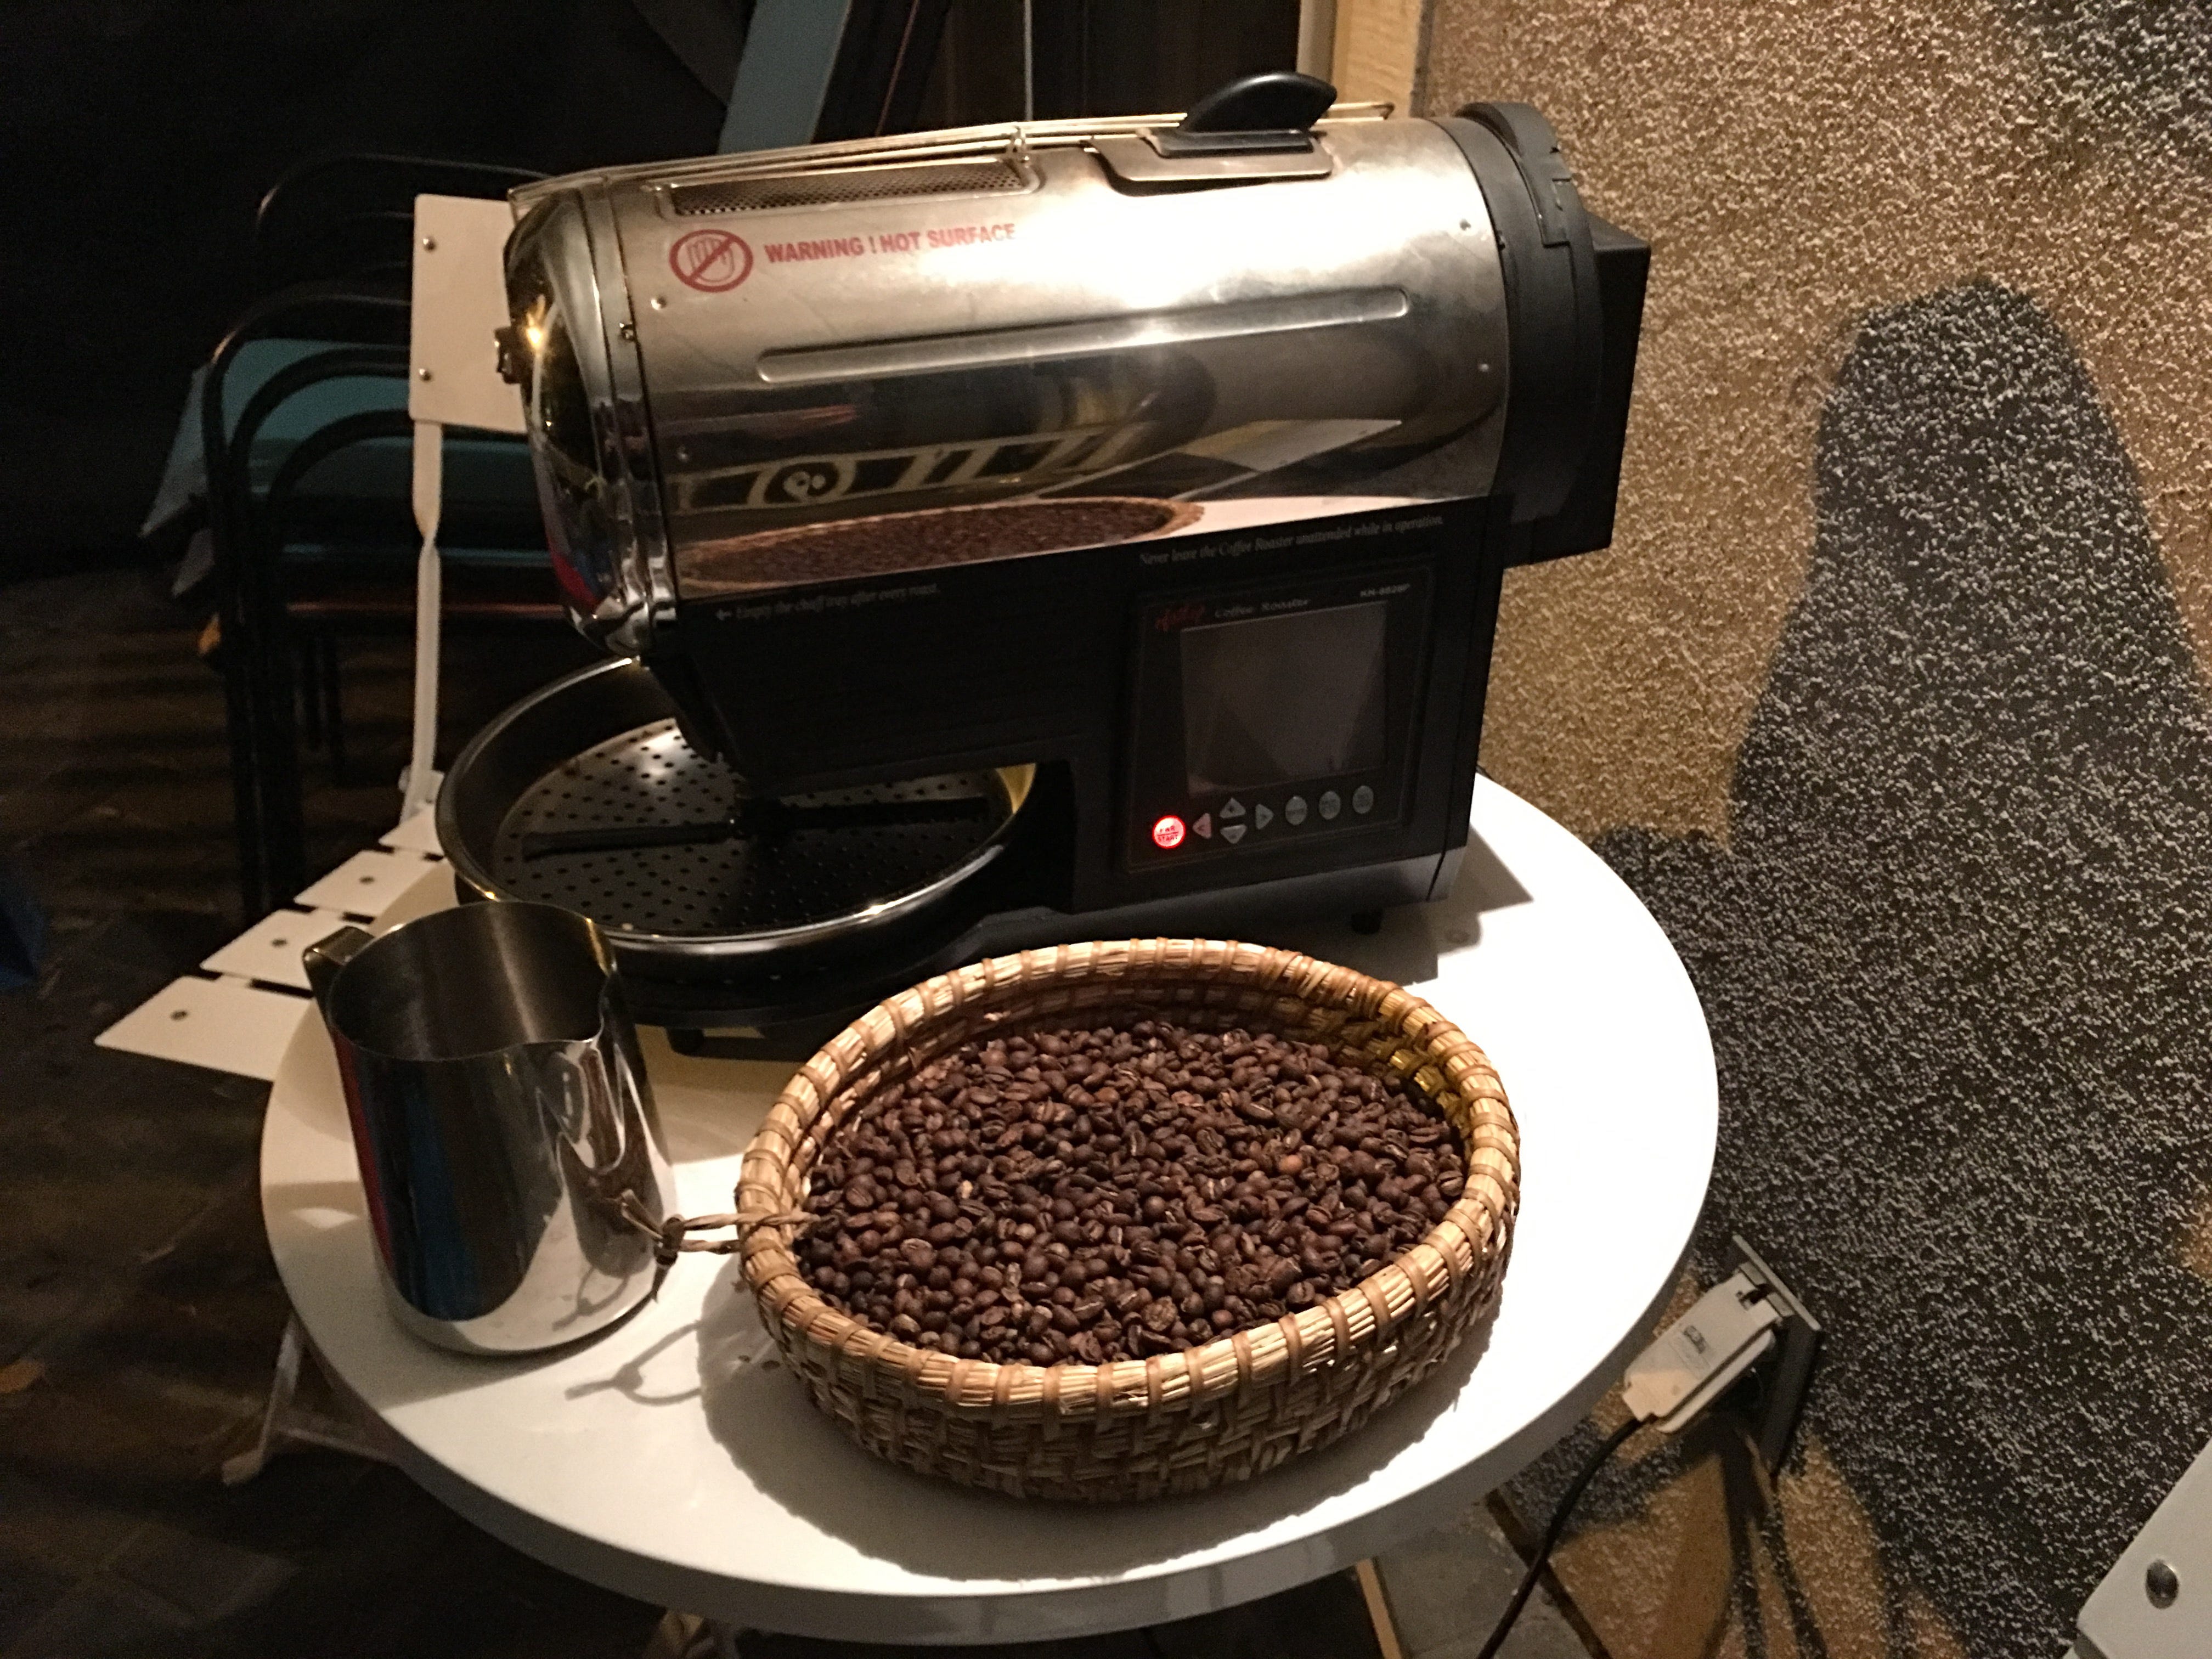 Evaluating the Kruve EQ Cup for Espresso, by Robert McKeon Aloe